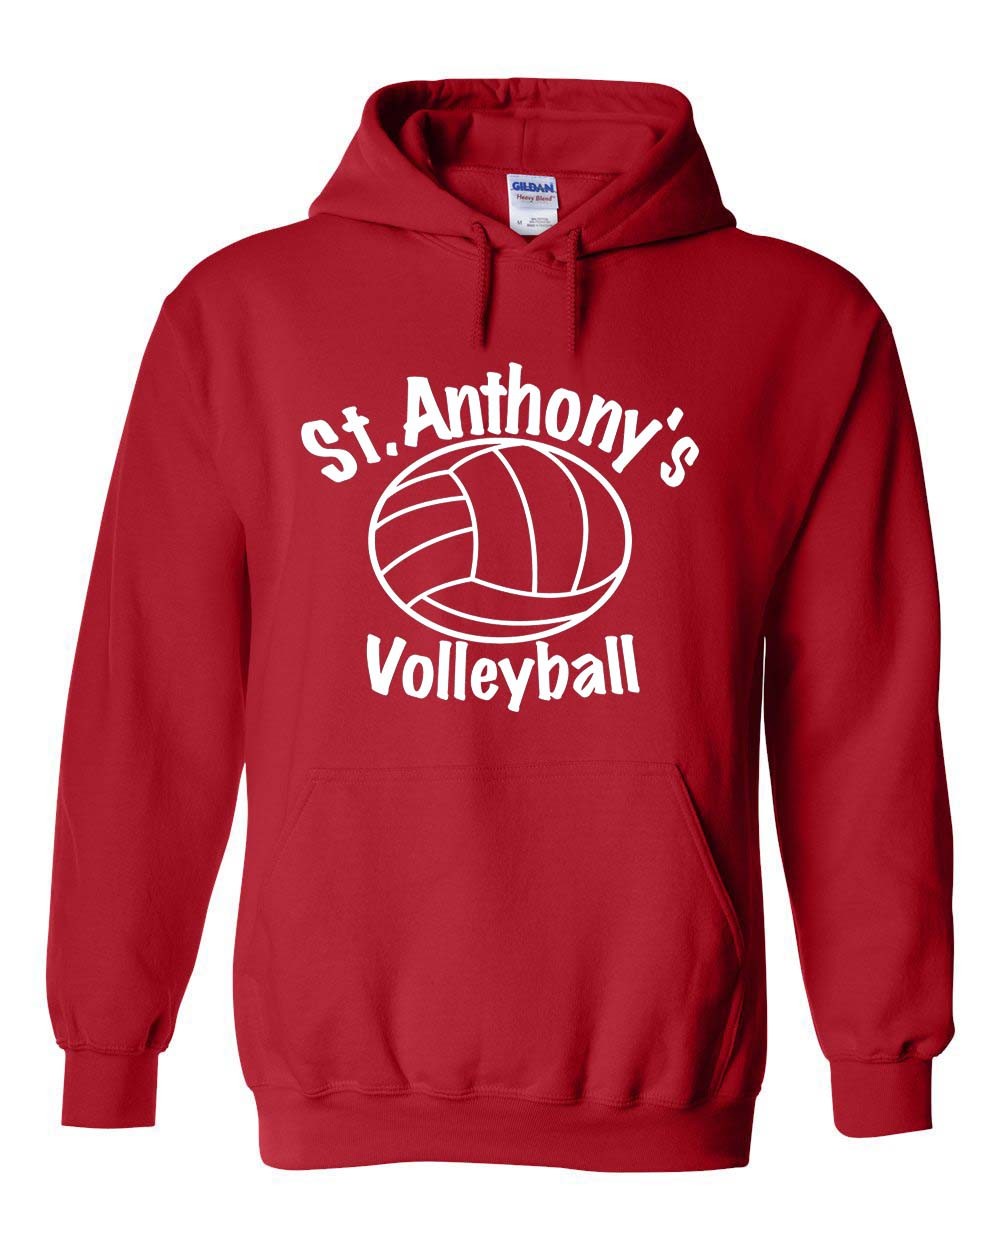 SAS Red Volleyball Team Hoodie w/Logo & Name/Number - Please Allow 2-3 Weeks For Delivery 